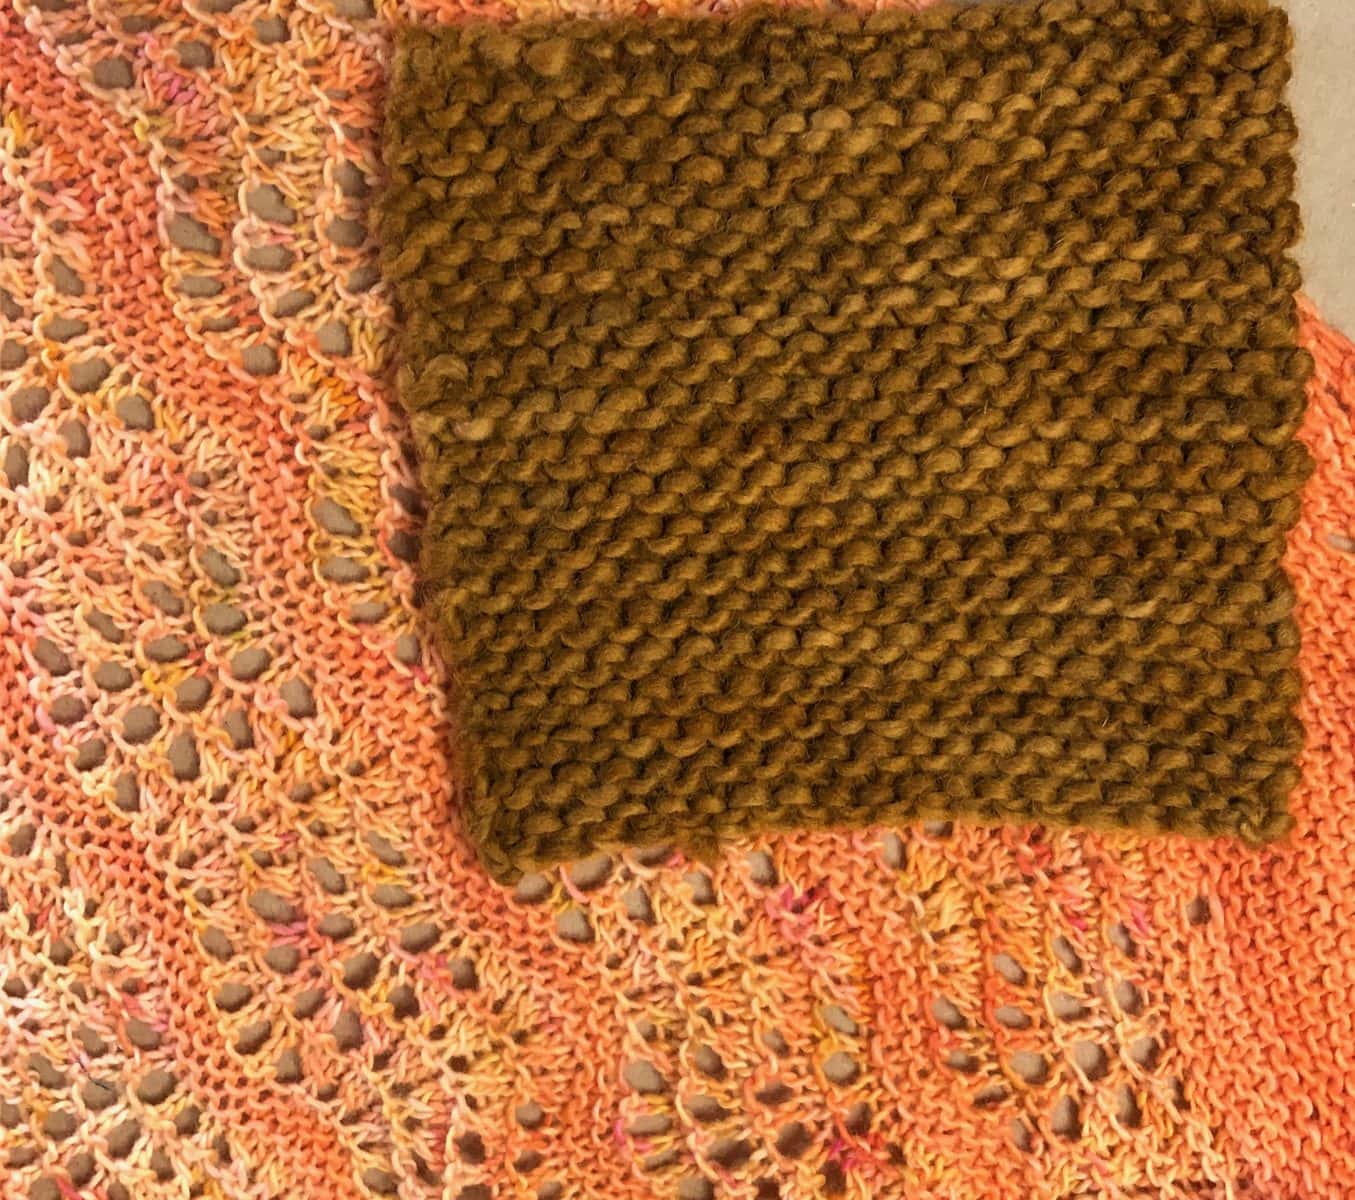 image description: a close-up view of a swatch of garter stitch fabric; wear and pilling are evident on the surface